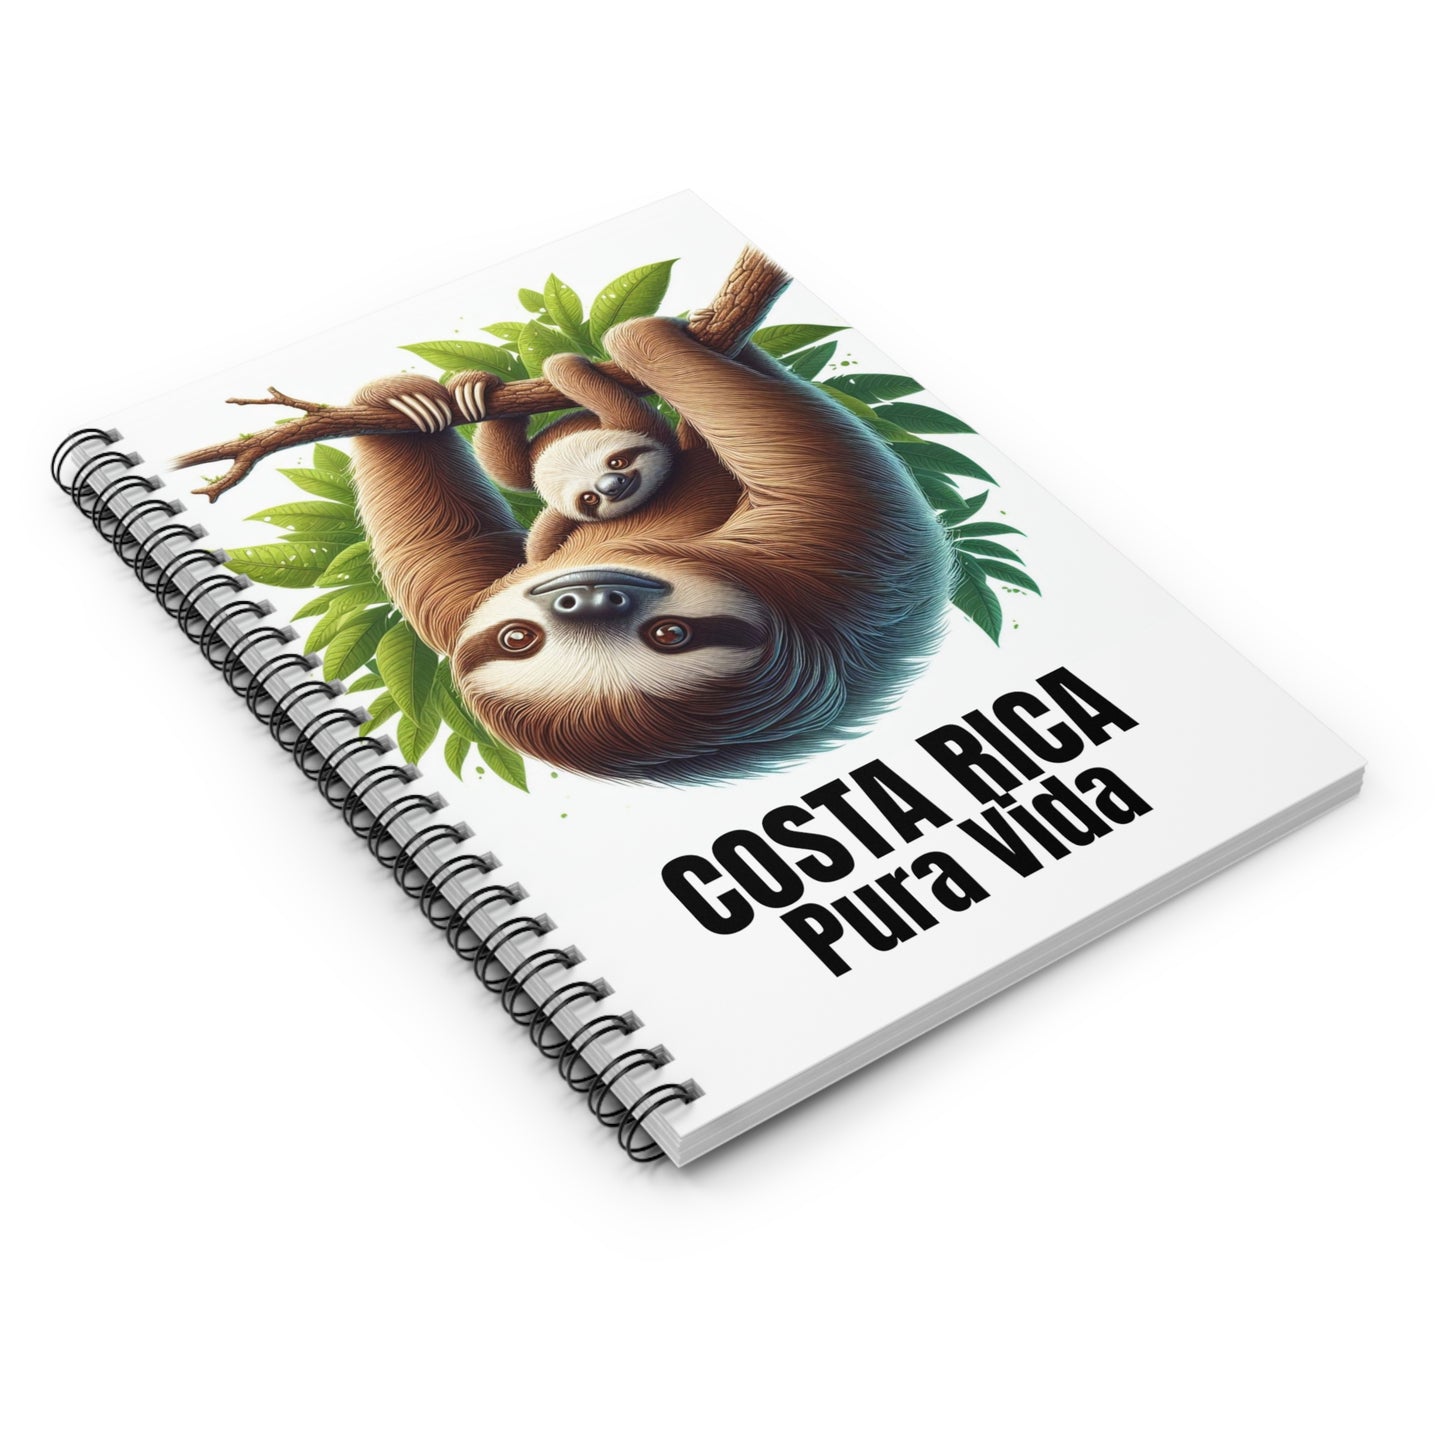 Costa Rica Pura Vida Sloth Mother and Baby Spiral Notebook - Ruled Line